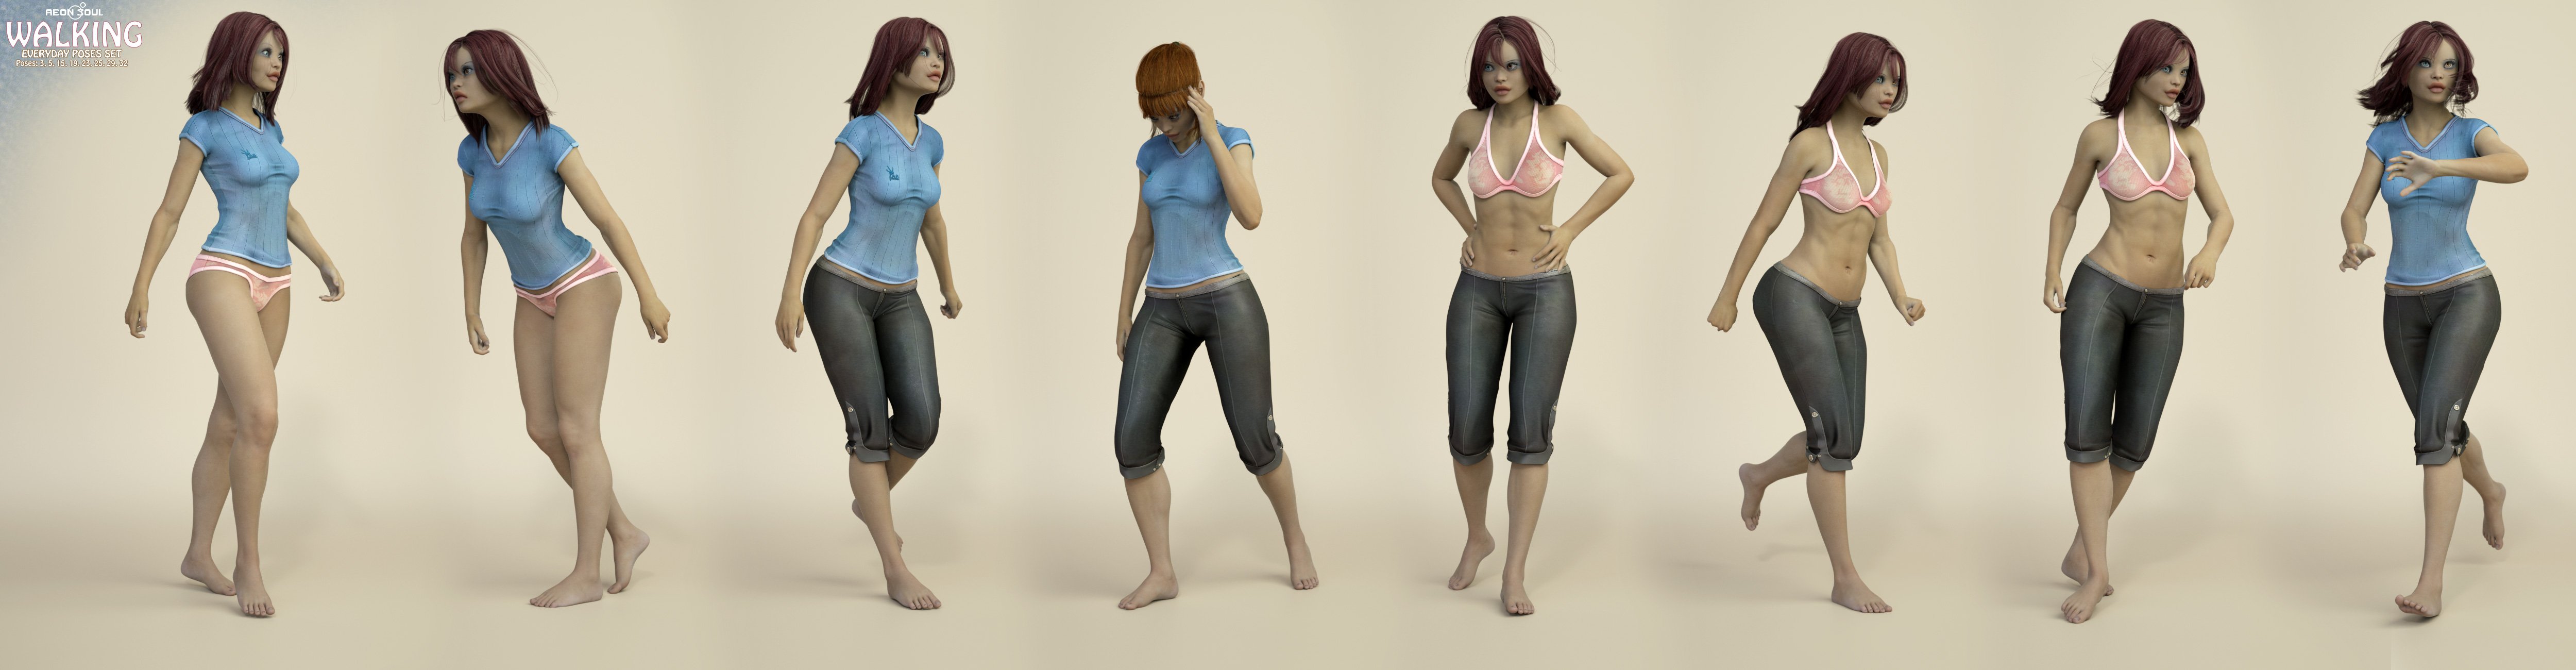 EveryDay Poses: Walking for Genesis 3 Female(s) by: Aeon Soul, 3D Models by Daz 3D